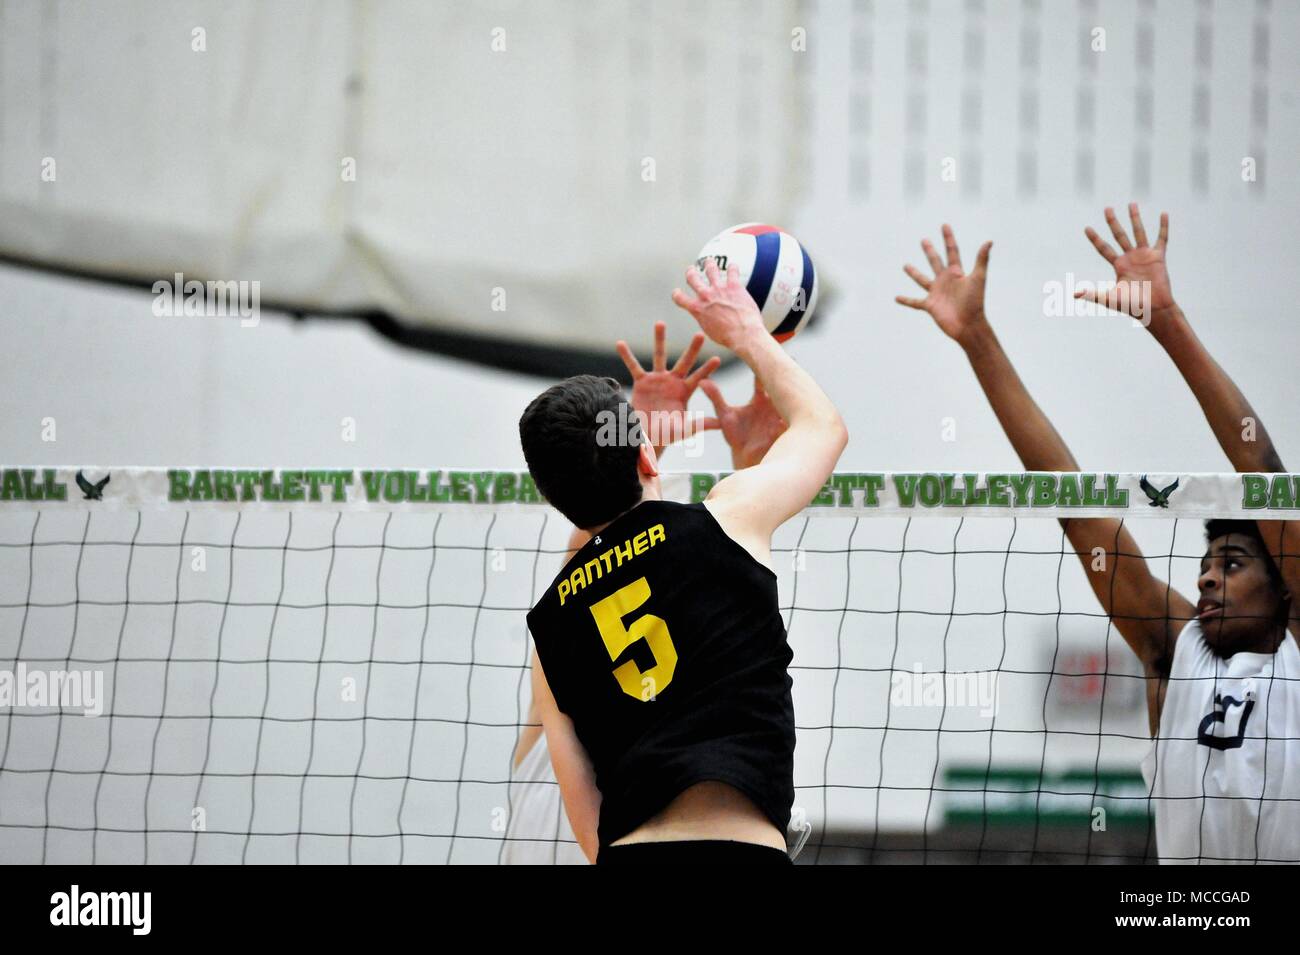 Player delivering a kill shot past a pair of opponents at the net. USA. Stock Photo